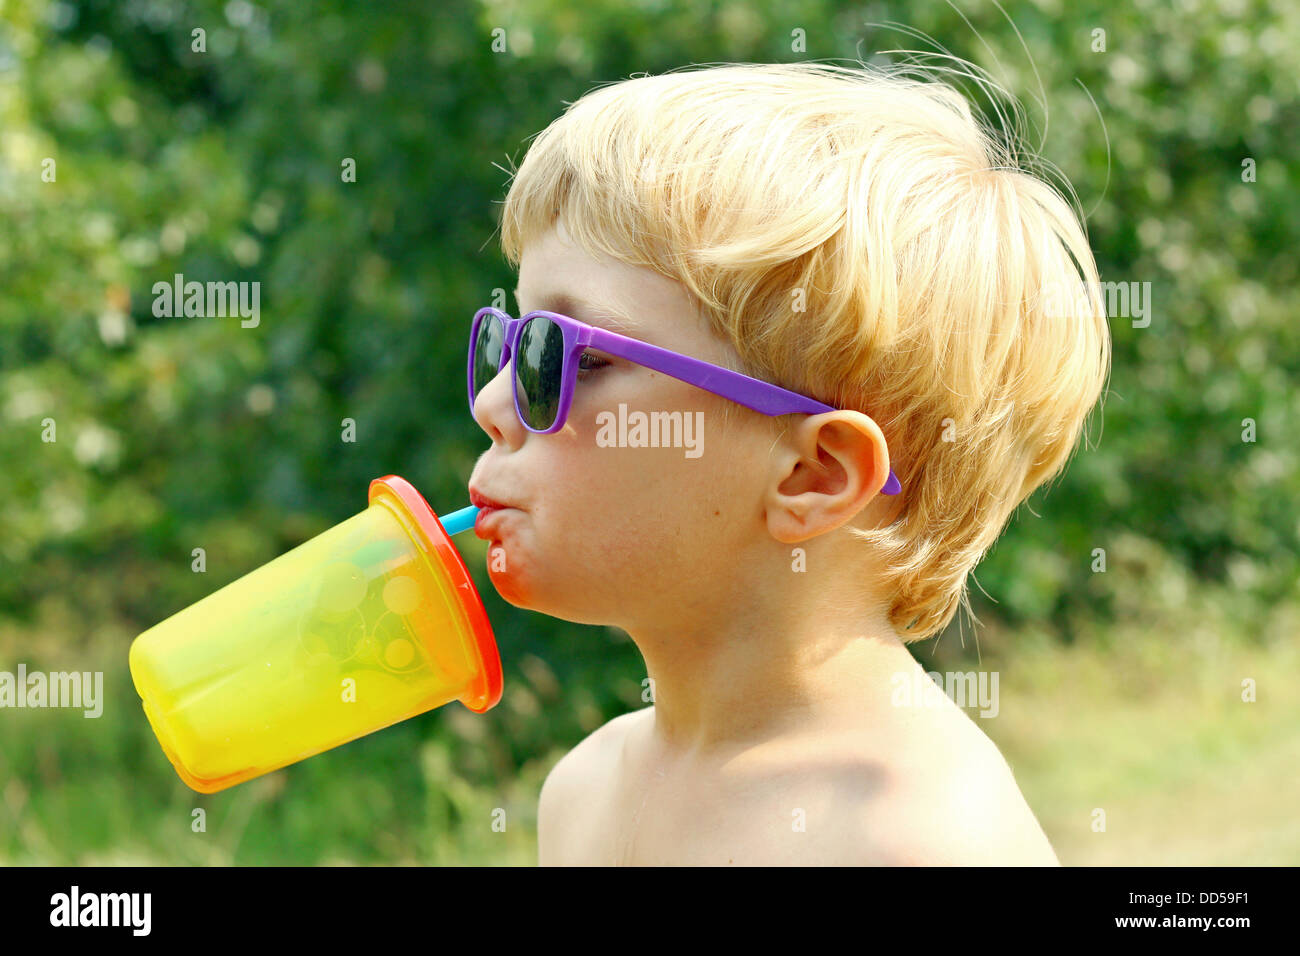 a young boy wearing purple sunglasses is tipping his head back drinking juice from a colorful sippy cup on a sunny summer day Stock Photo